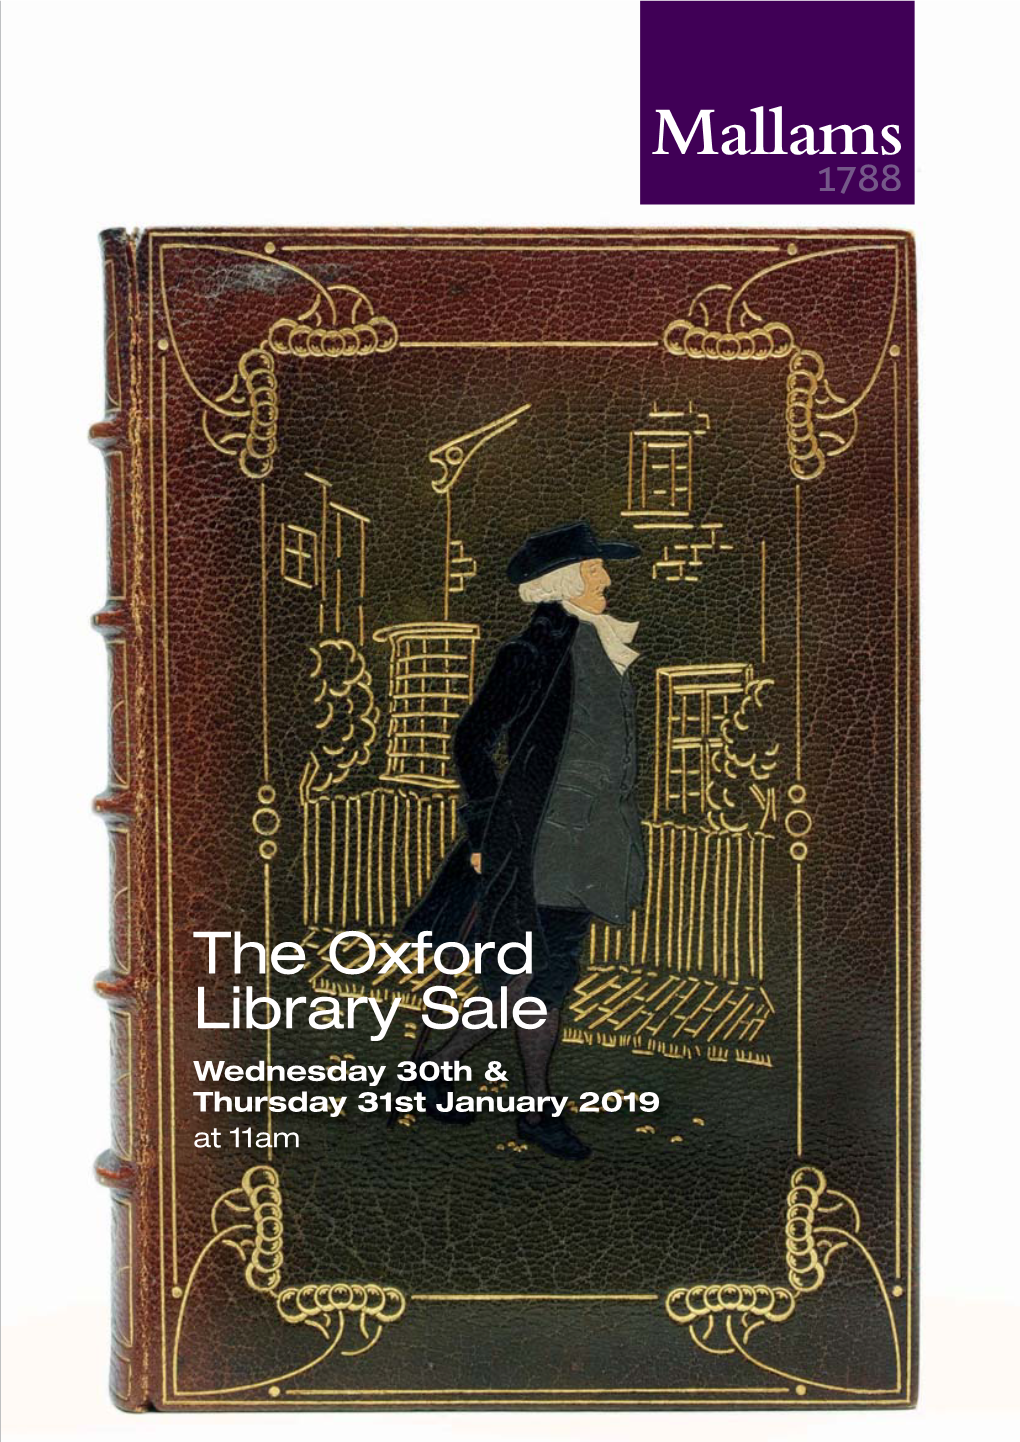 1788 the Oxford Library Sale Including Time & Music